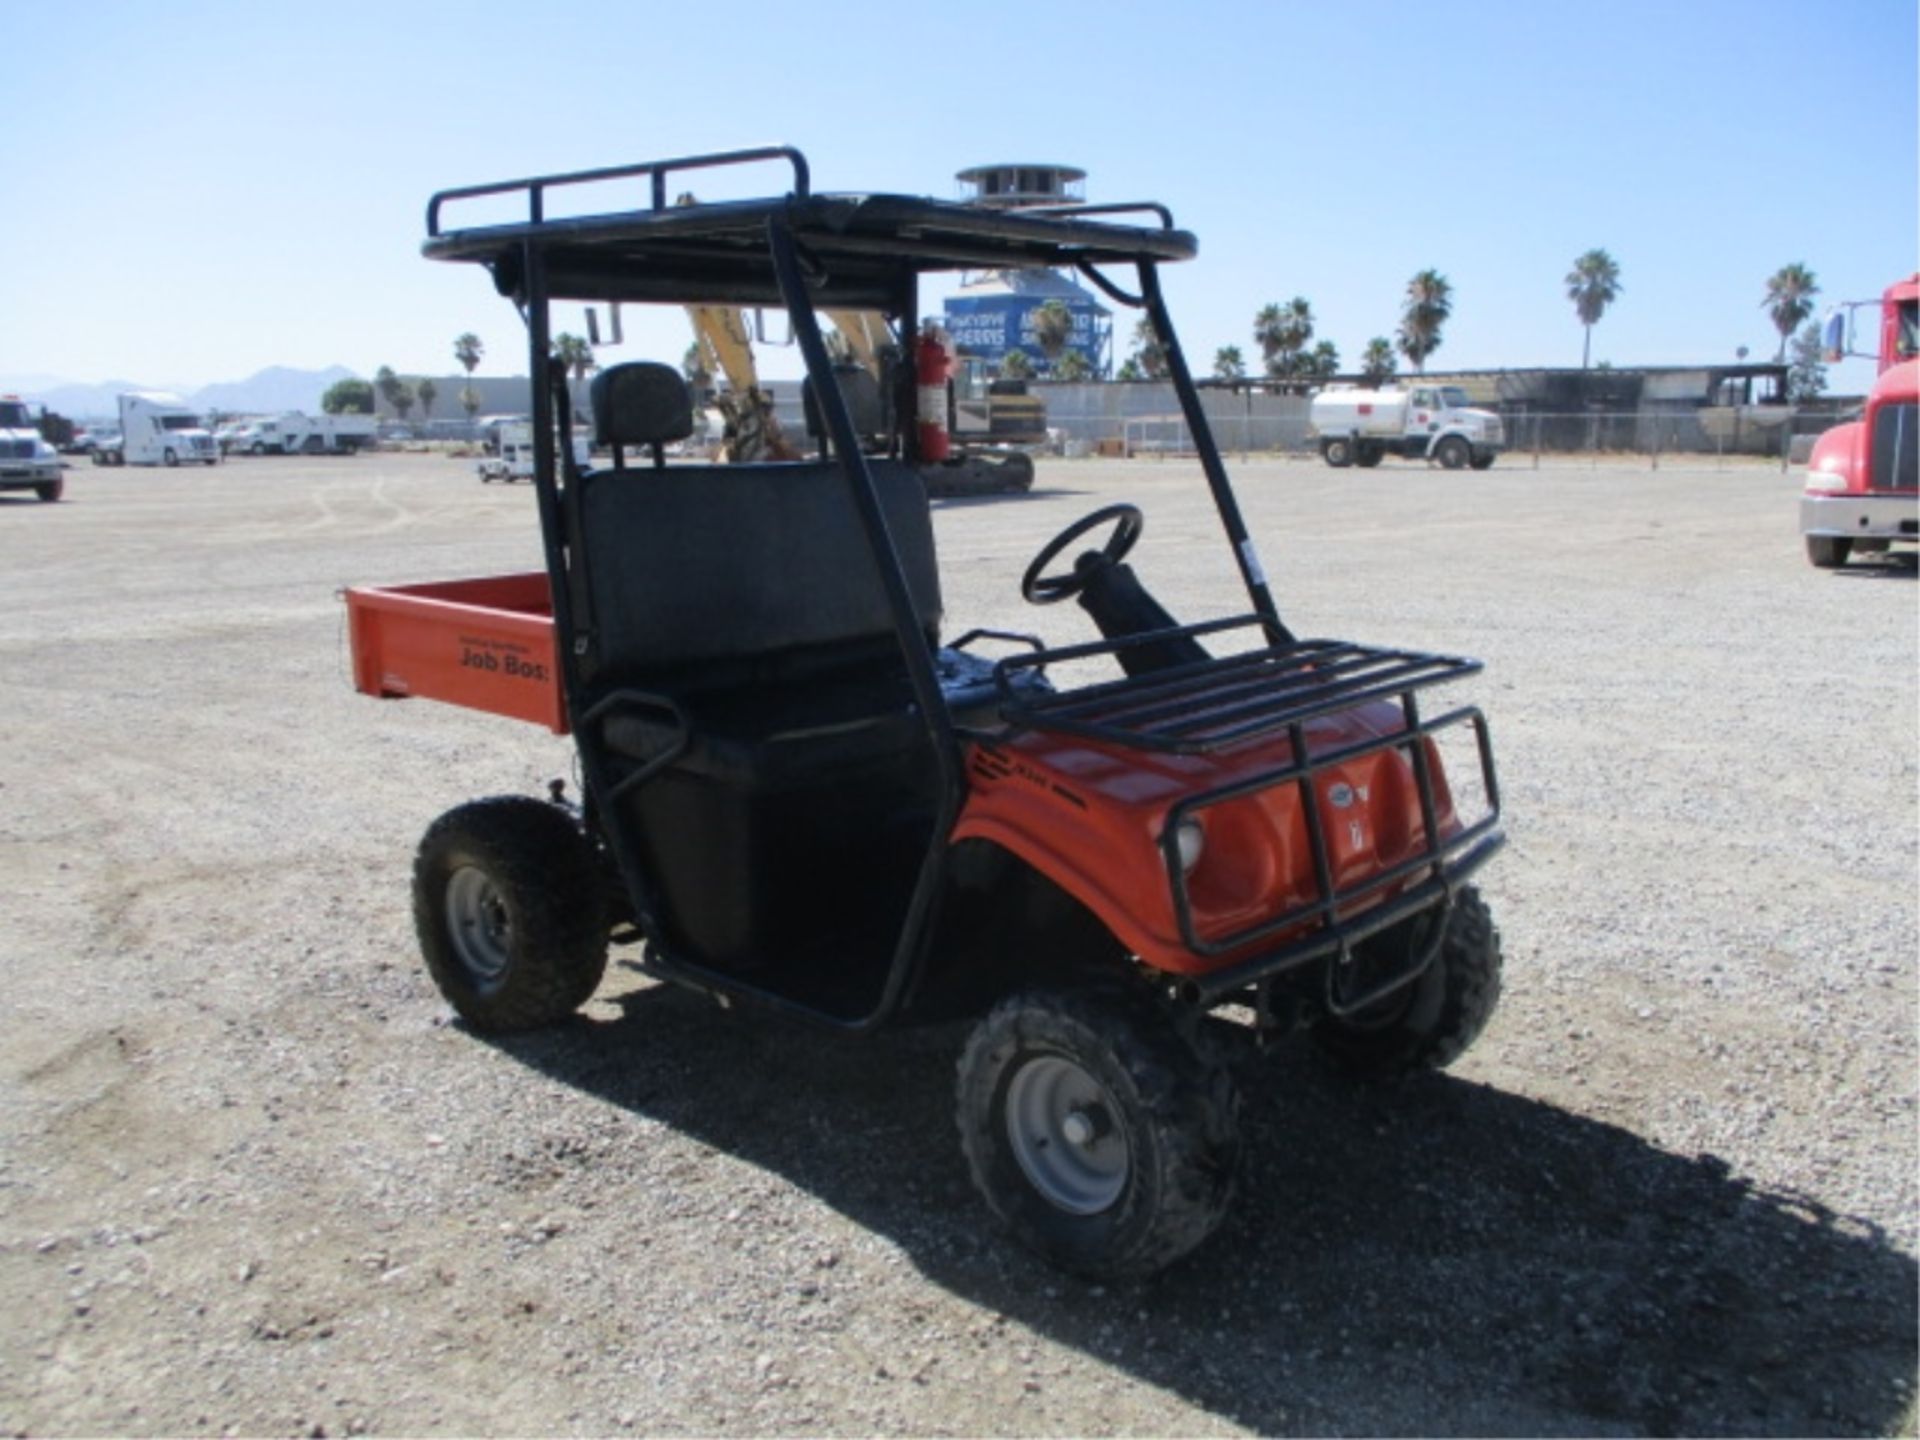 2008 American Sportworks Job Boss Utility Cart, Honda Gas, Rear Metal Dump Bed, Canopy, Tow Hitch, - Image 10 of 50